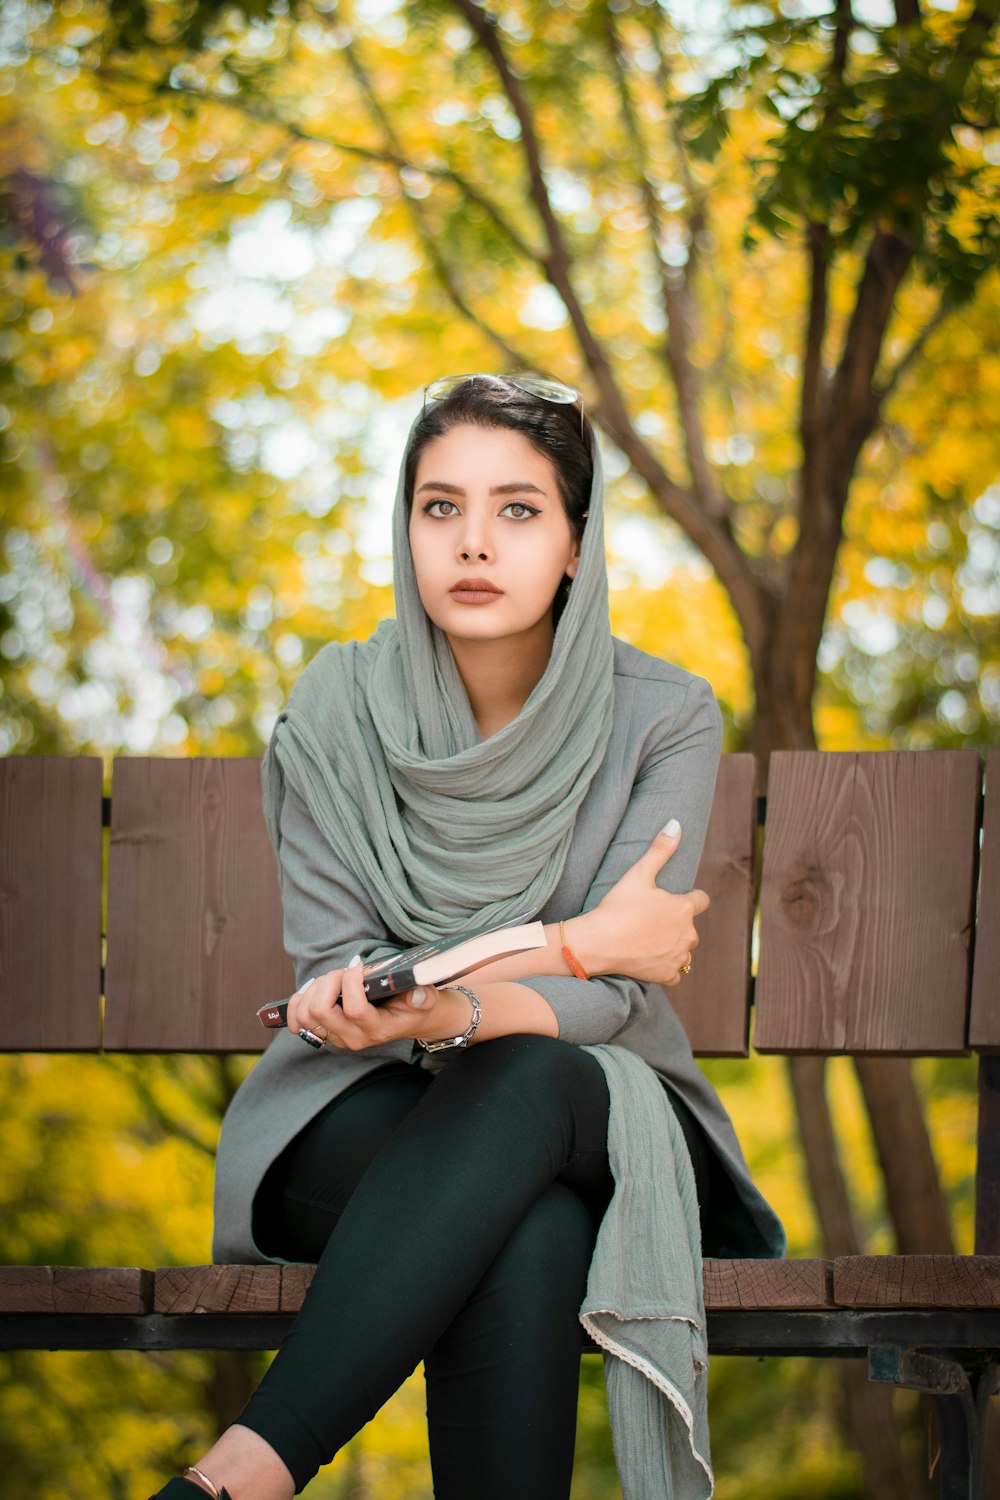 Woman in gray hijab and black leggings sitting on brown wooden bench photo  – Free Woman Image on Unsplash